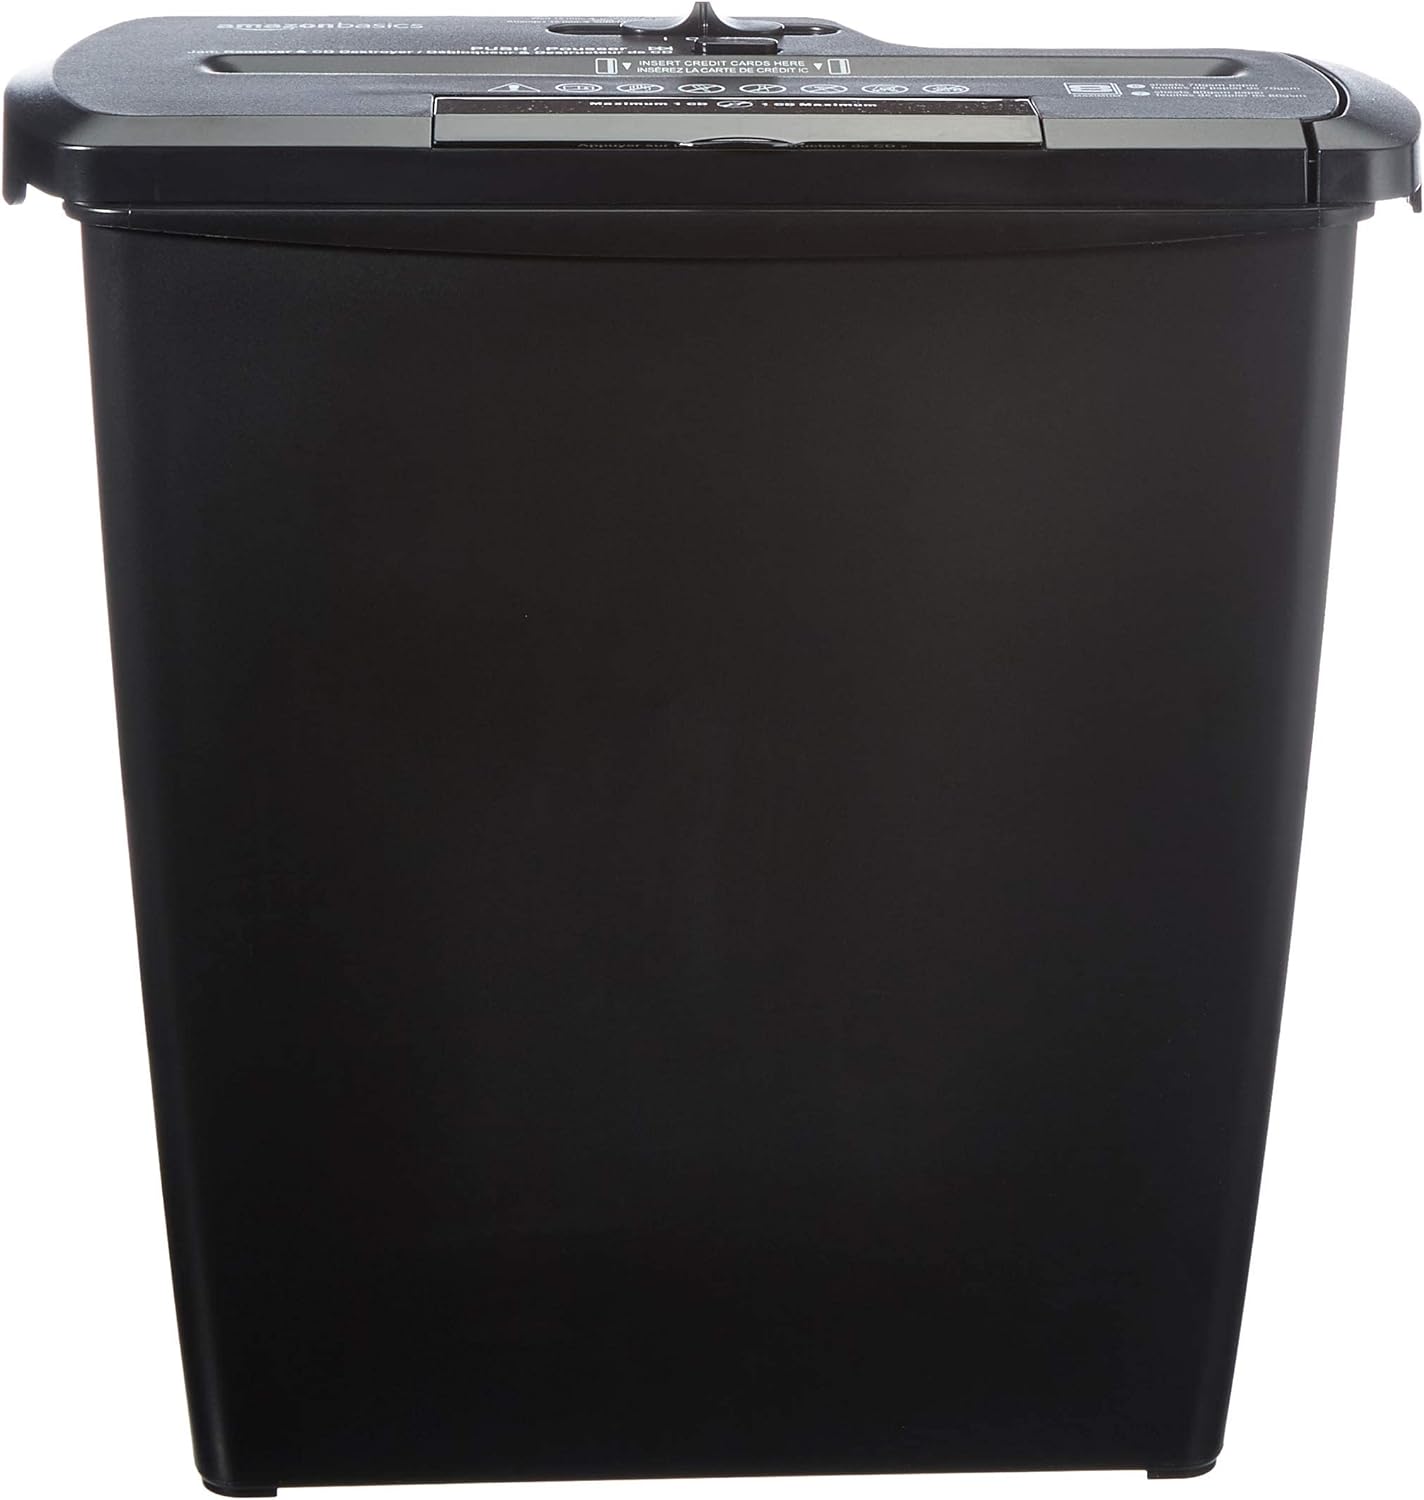 Amazon Basics 7-8 Sheet Strip Cut Paper, Credit Card, CD & DVD Shredder with Bin for Business & Home Office Use with Paper Reverse Function, Black 7032